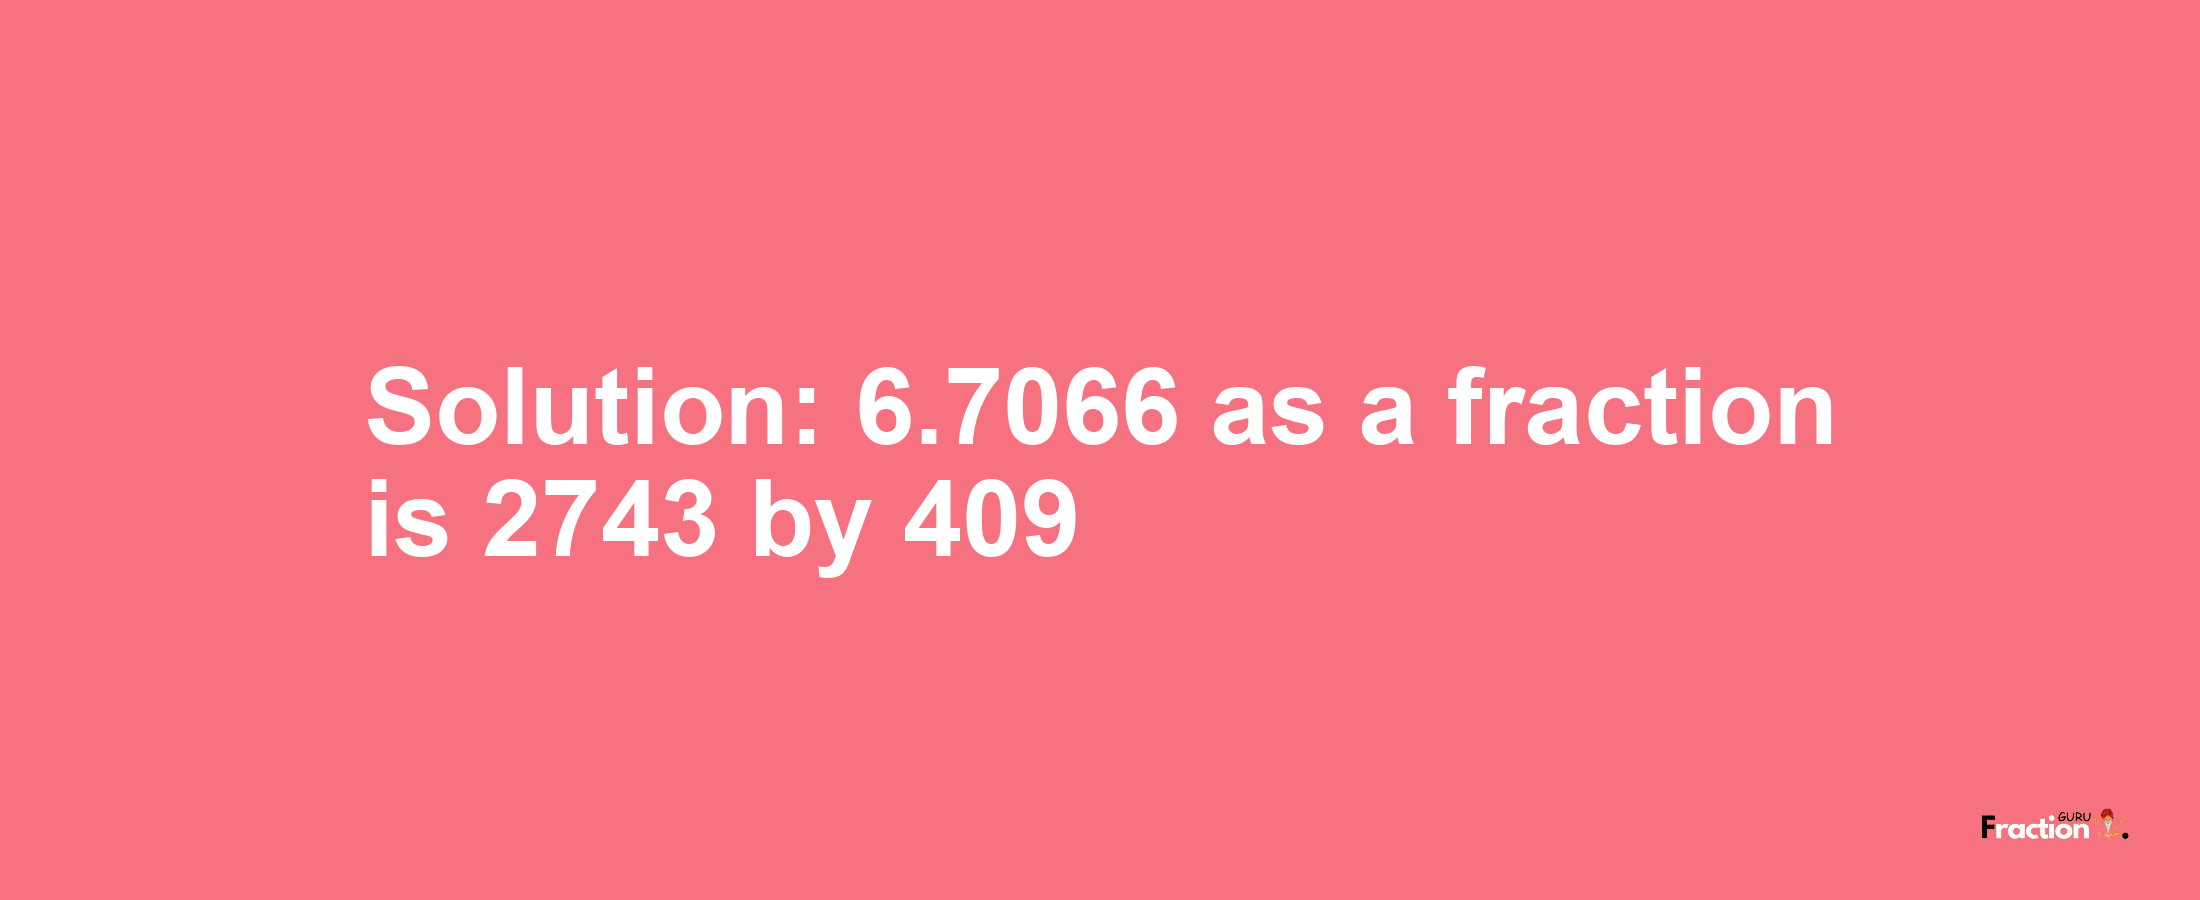 Solution:6.7066 as a fraction is 2743/409